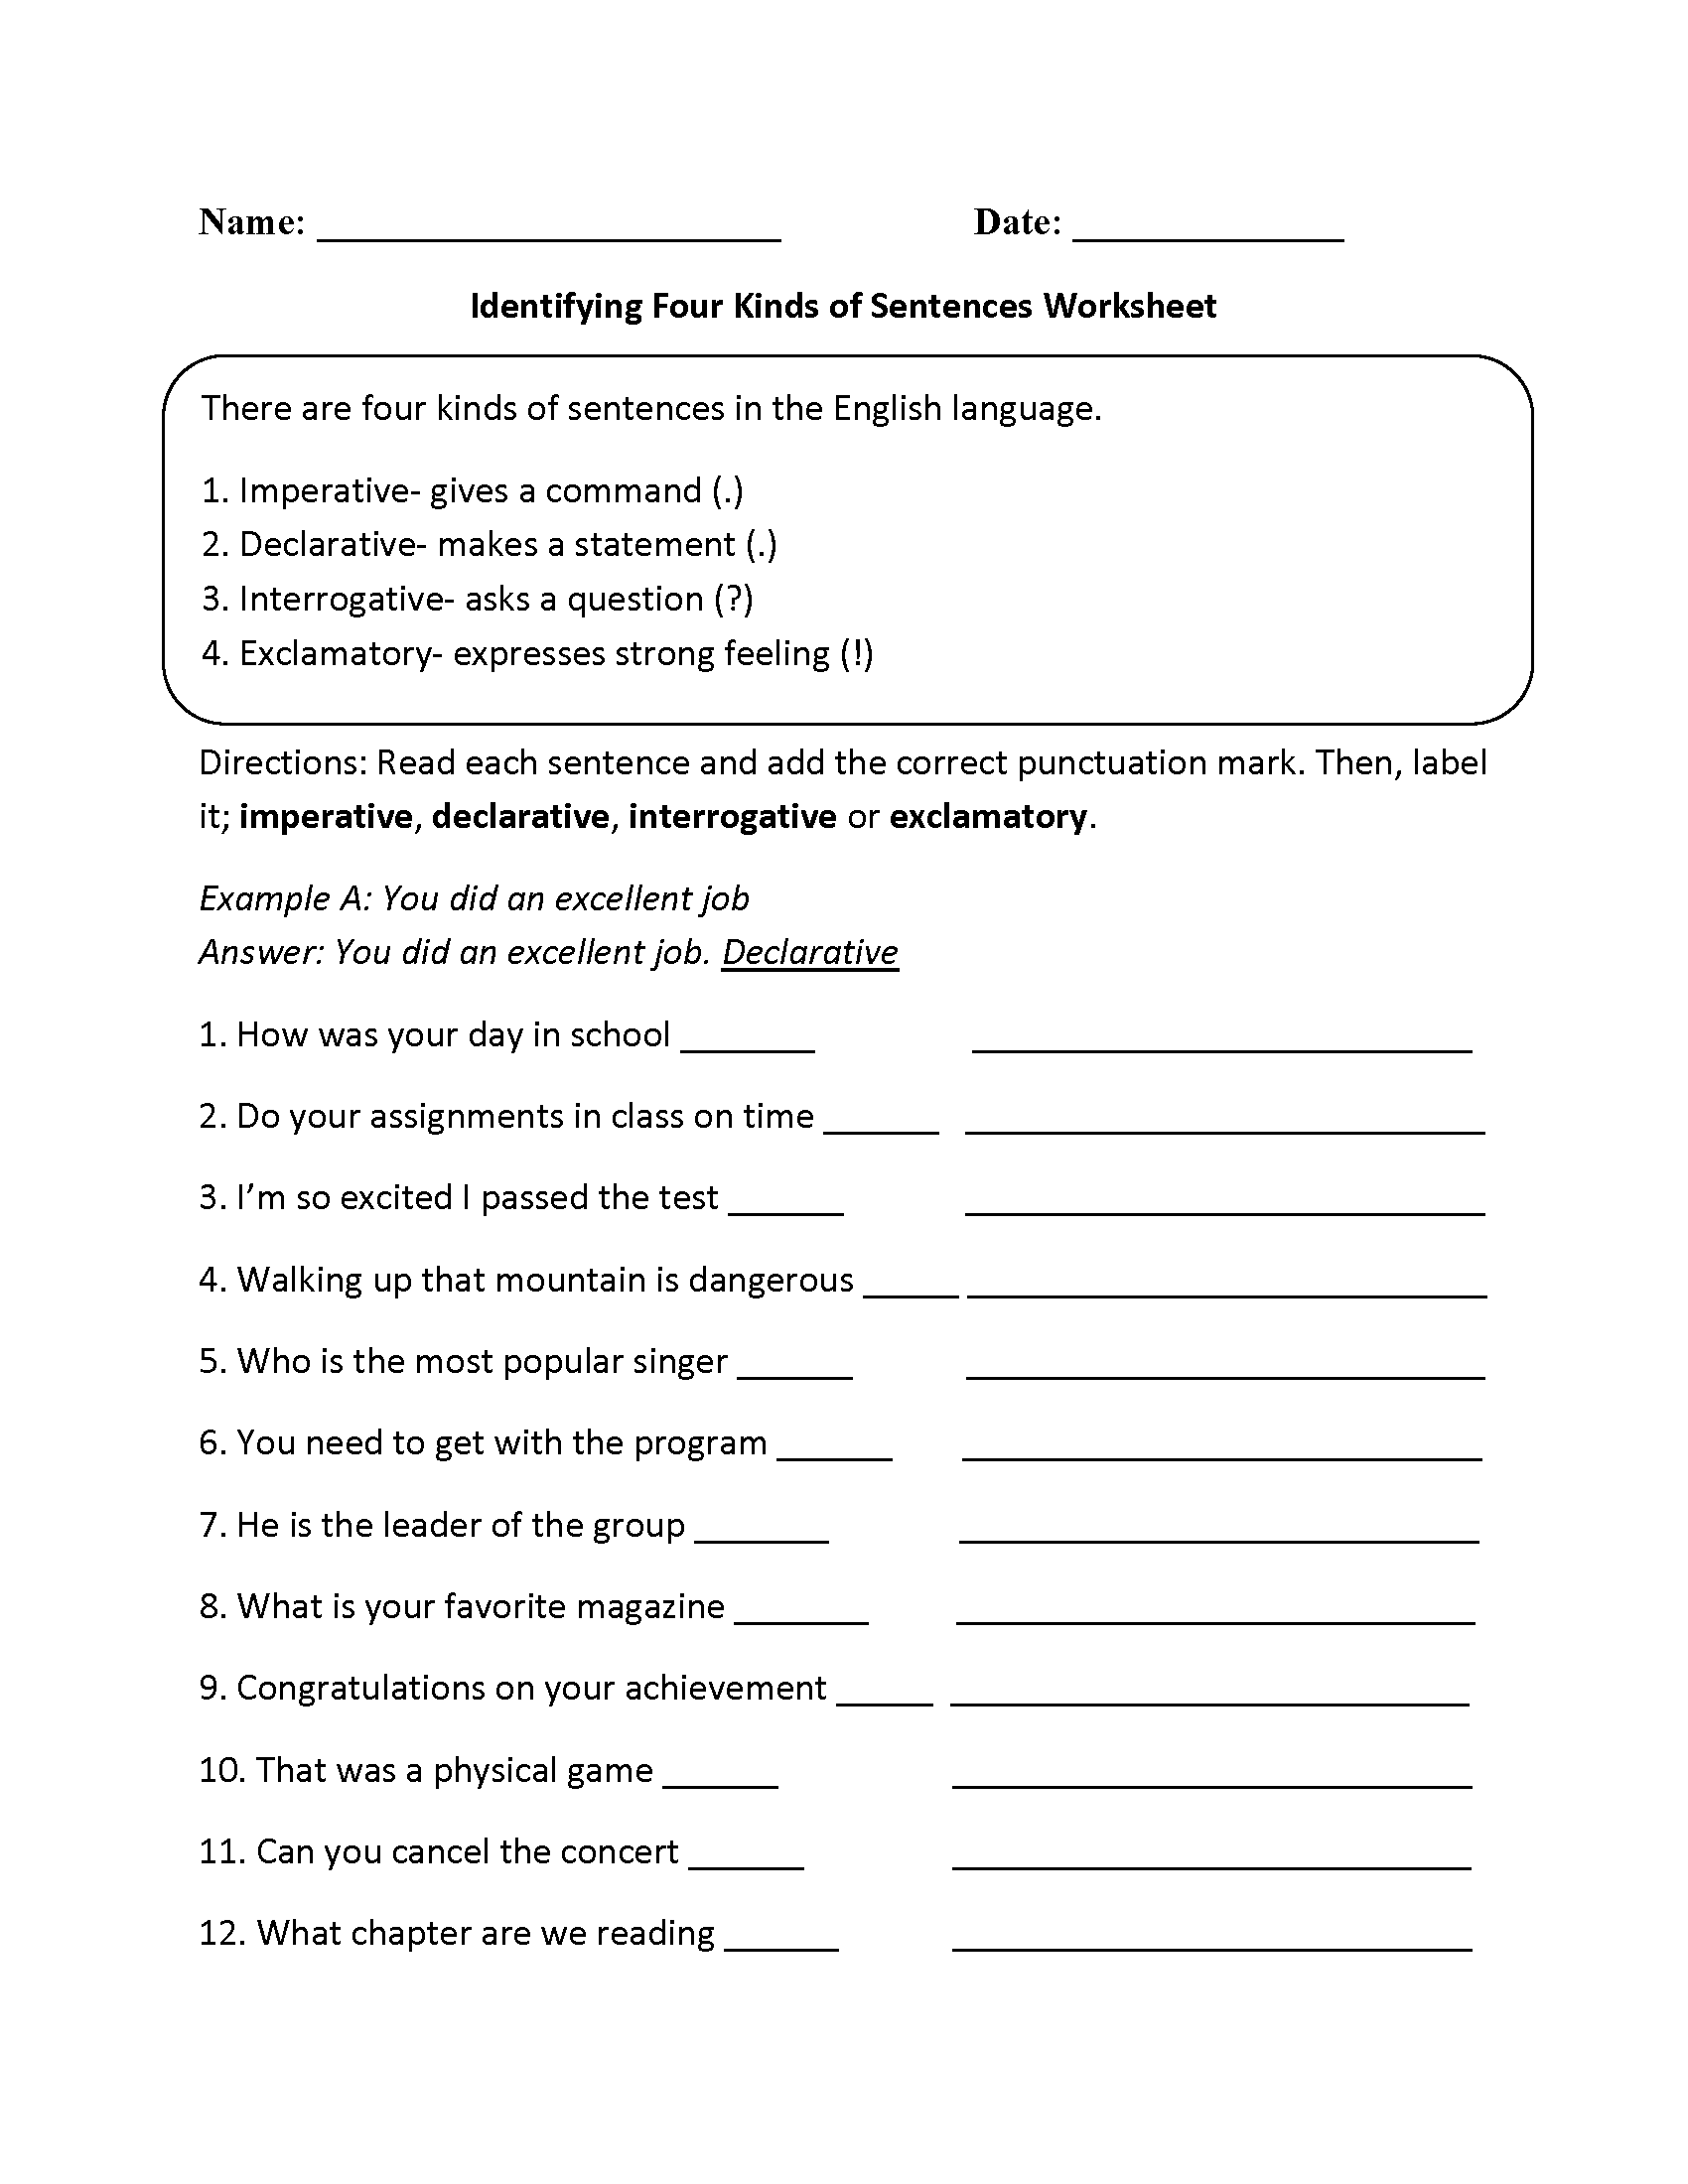 Worksheet On Kinds Of Sentences For Class 6